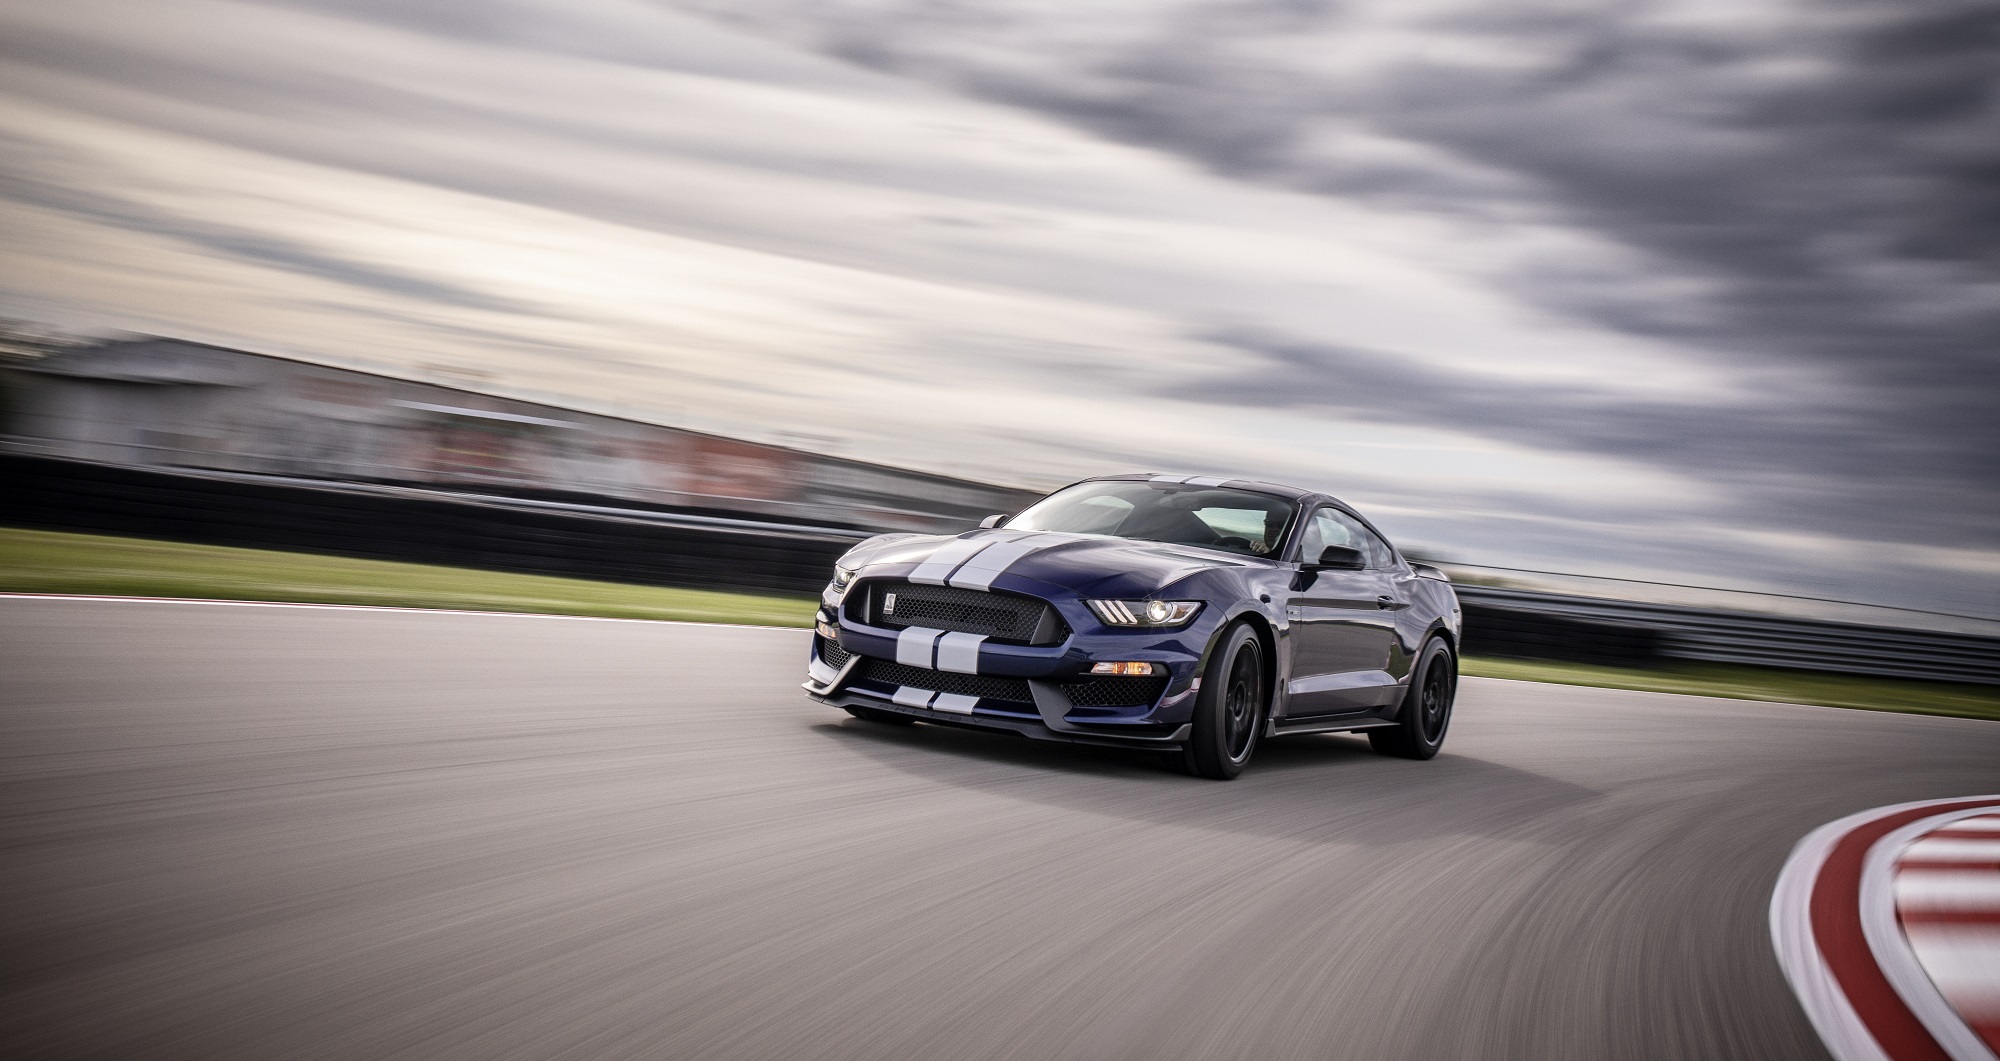 The Shelby GT350, like the Bullitt and the Boss 302, are a couple special editions that should return.